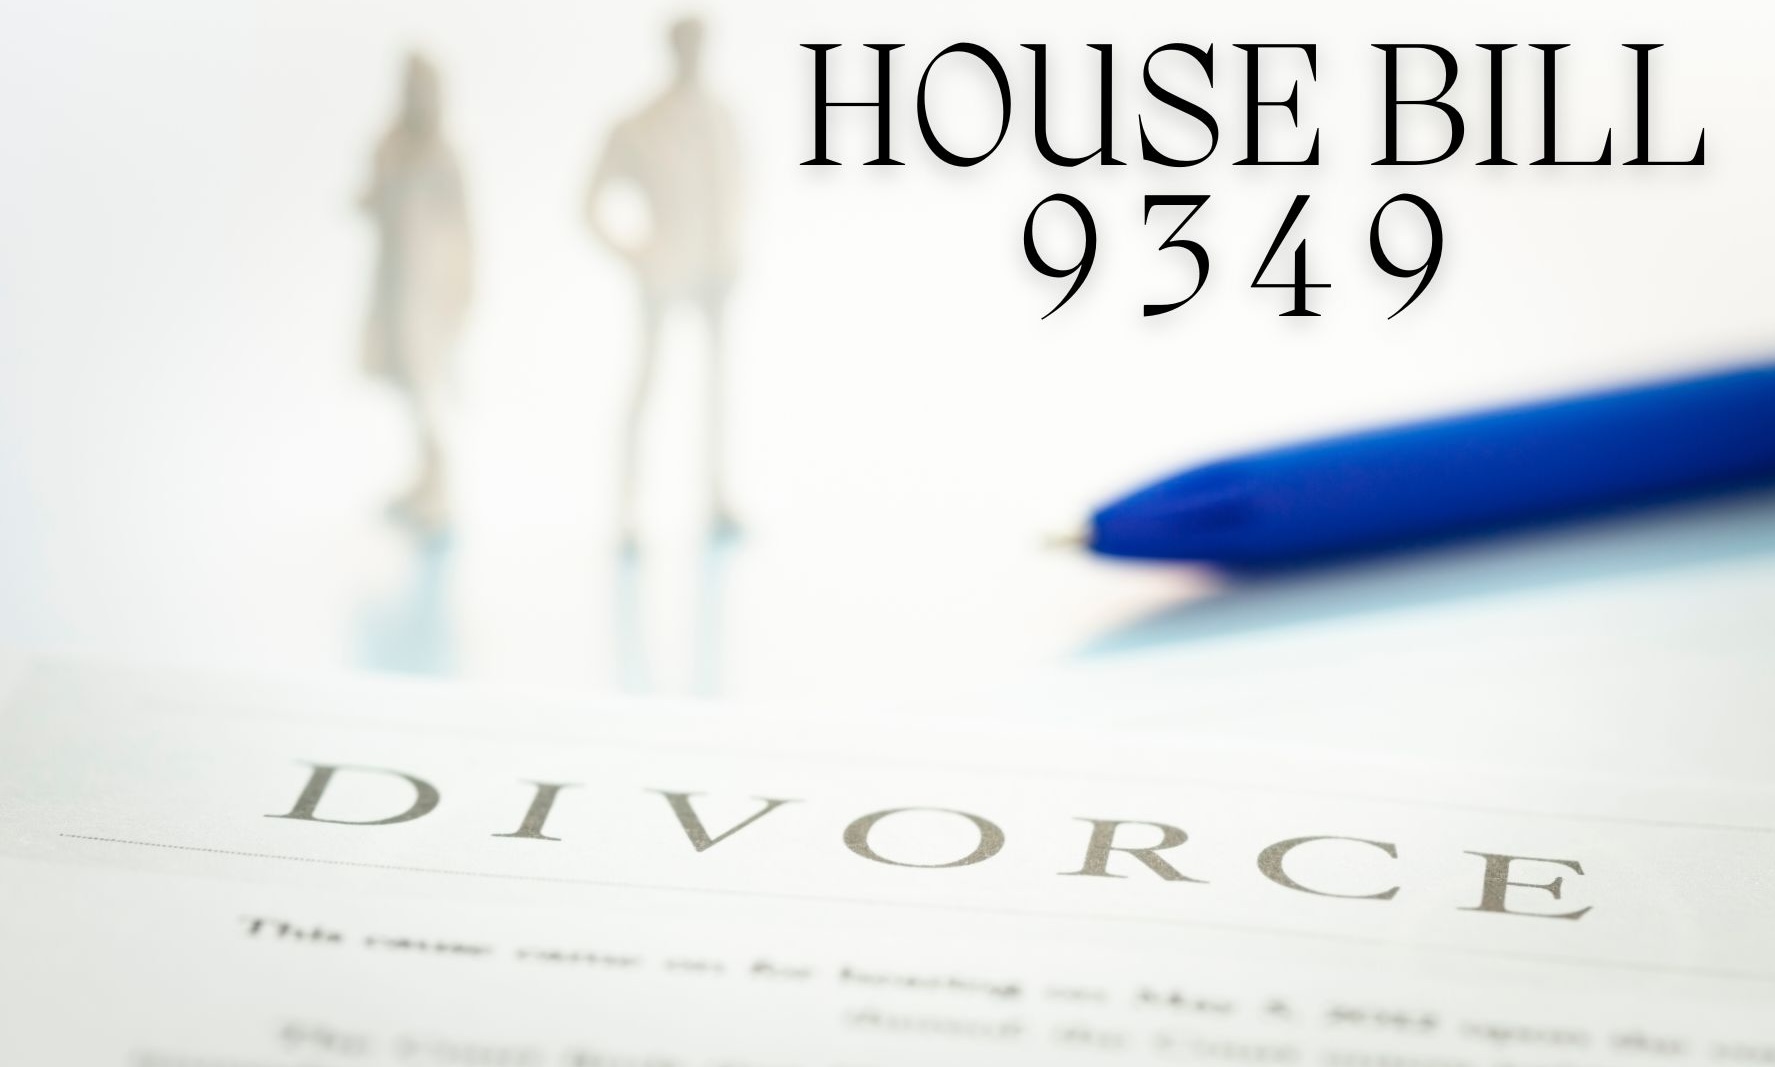 House Bill 9349 or the Absolute Divorce Bill has been transmitted to the Senate.